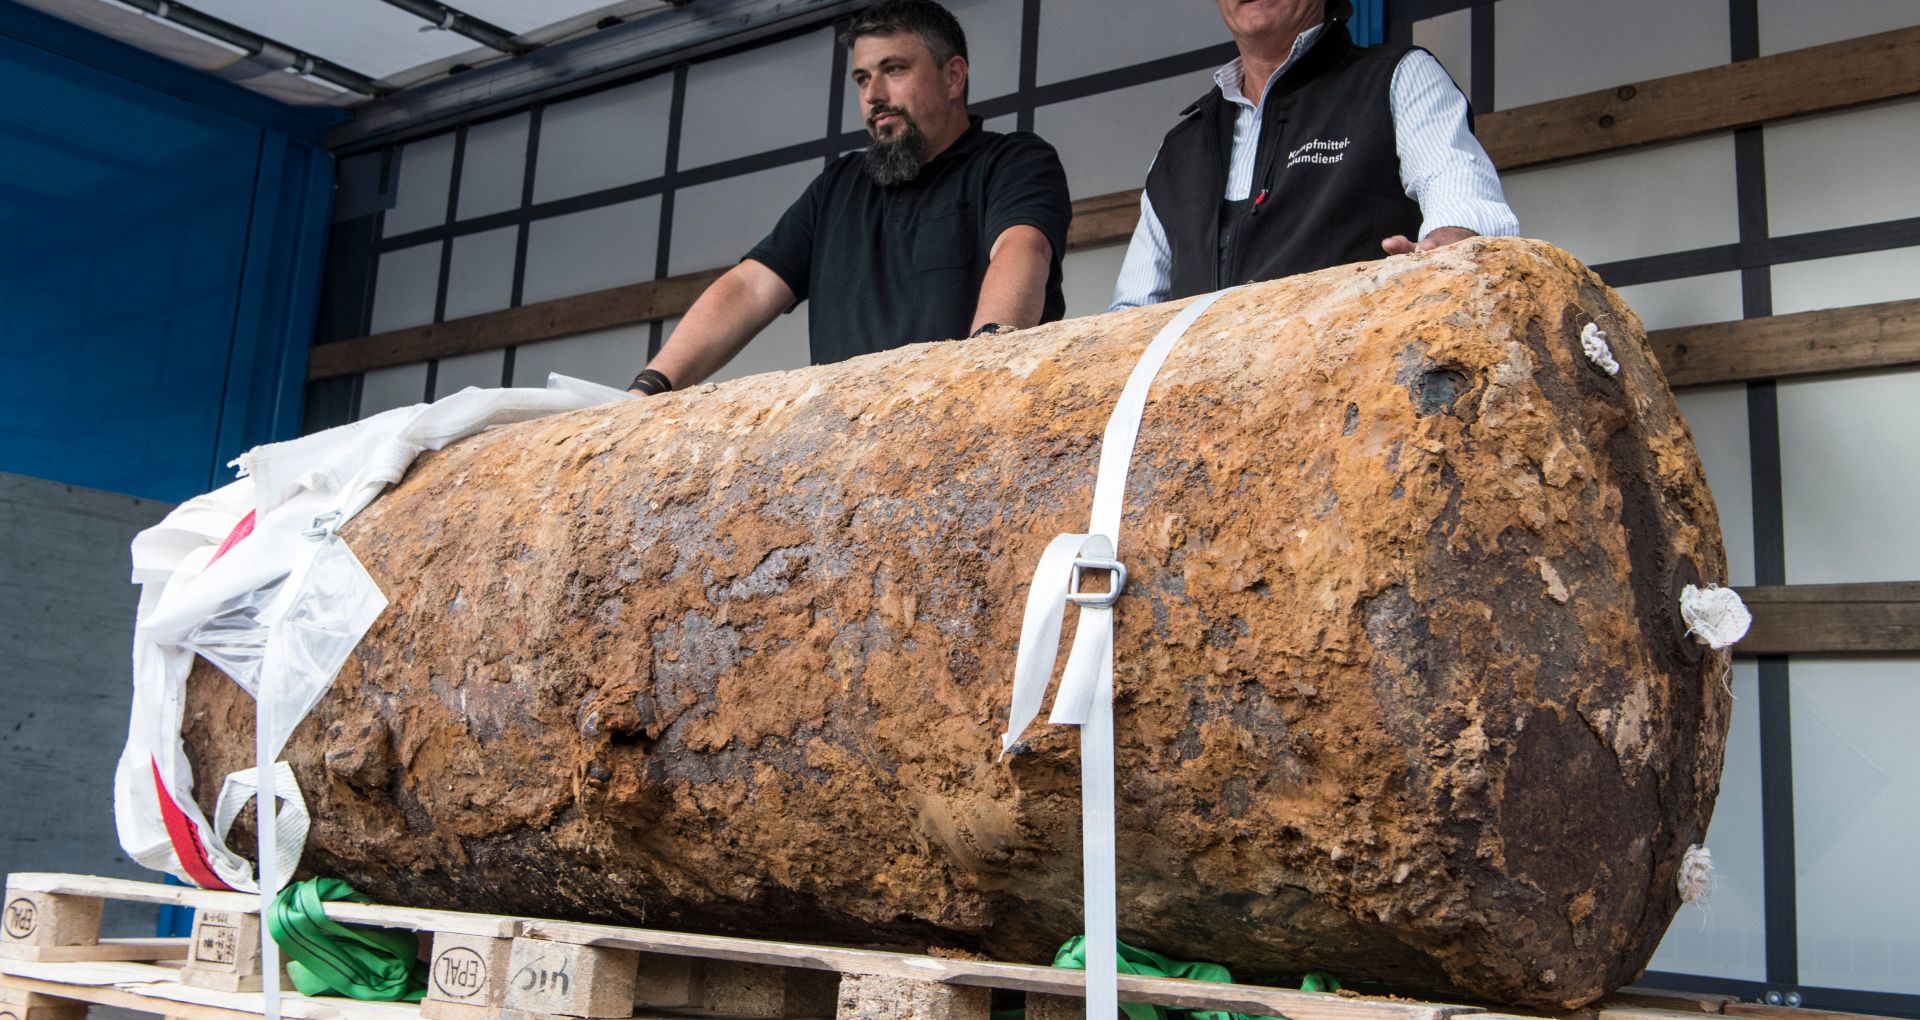 Bomb disposal experts Rene Bennert (L) and Dieter Schwetzler present the bomb of the type HC 4000 after the successful disposal in Frankfurt am Main, Germany, 3 September 2017. The disposal was more complicated than expected, because two of three detonators were difficult to remove. Photo: Boris Roessler/dpa